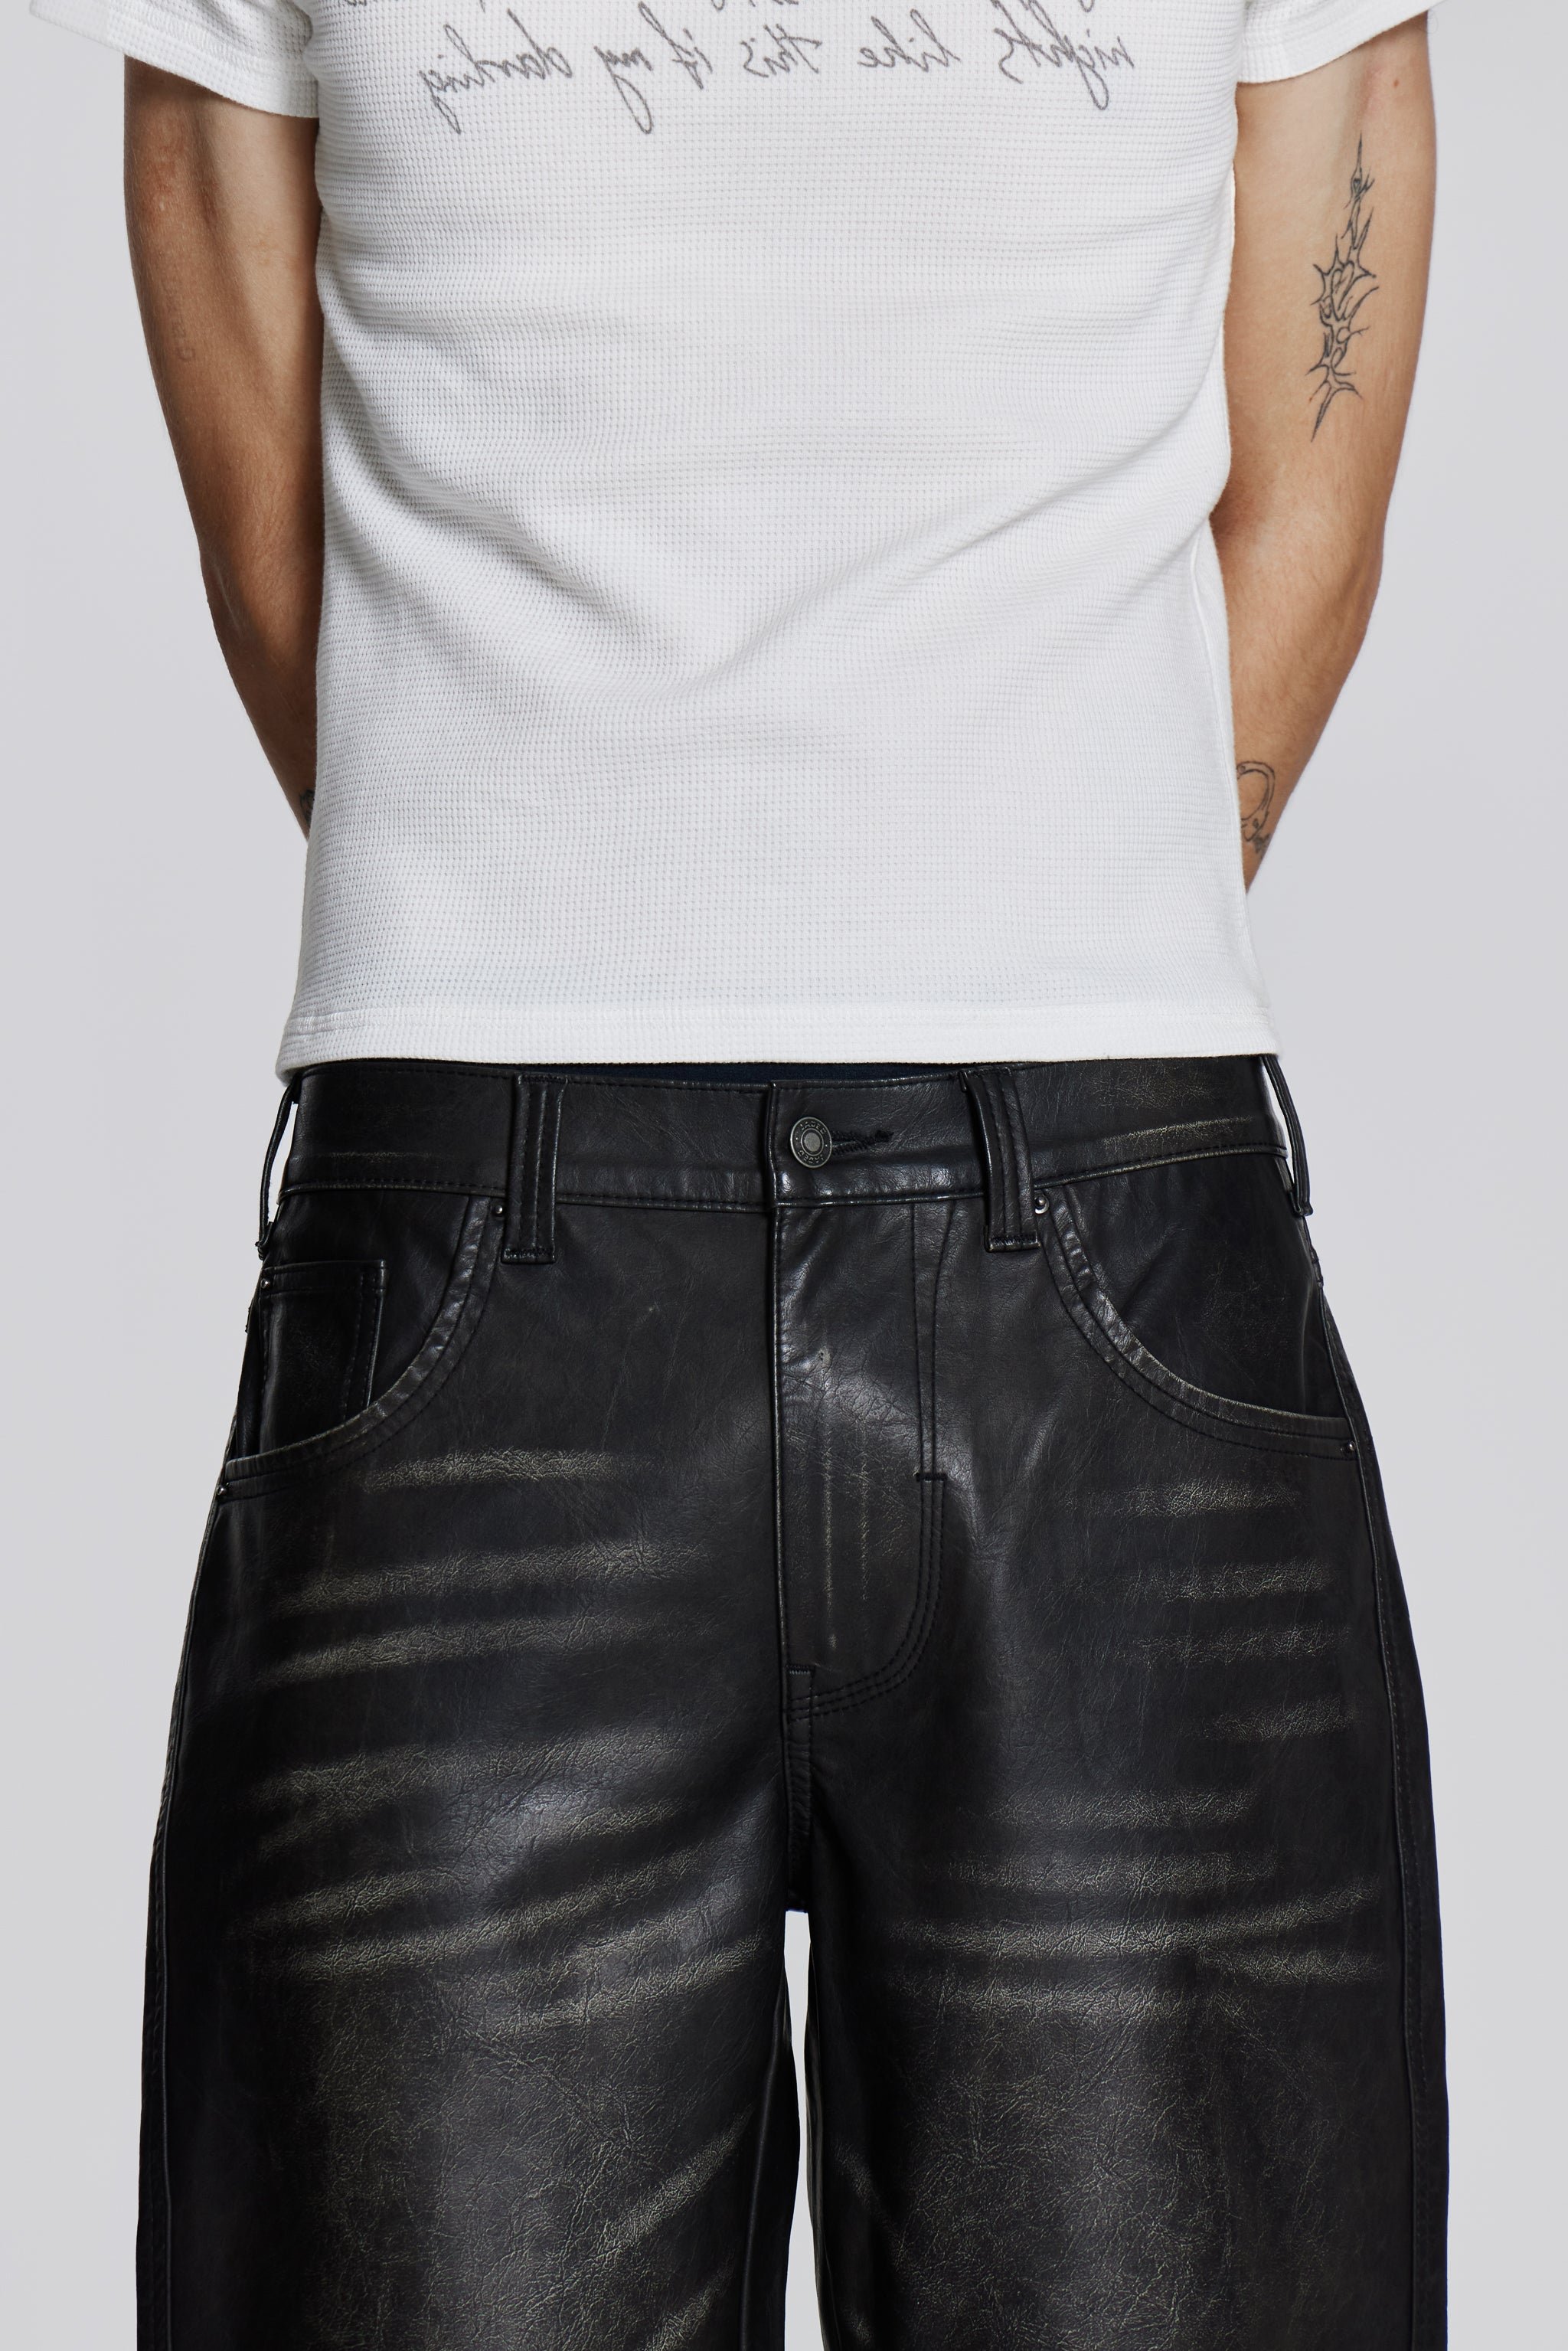 Jaded London Colossus Faux Leather Jeans